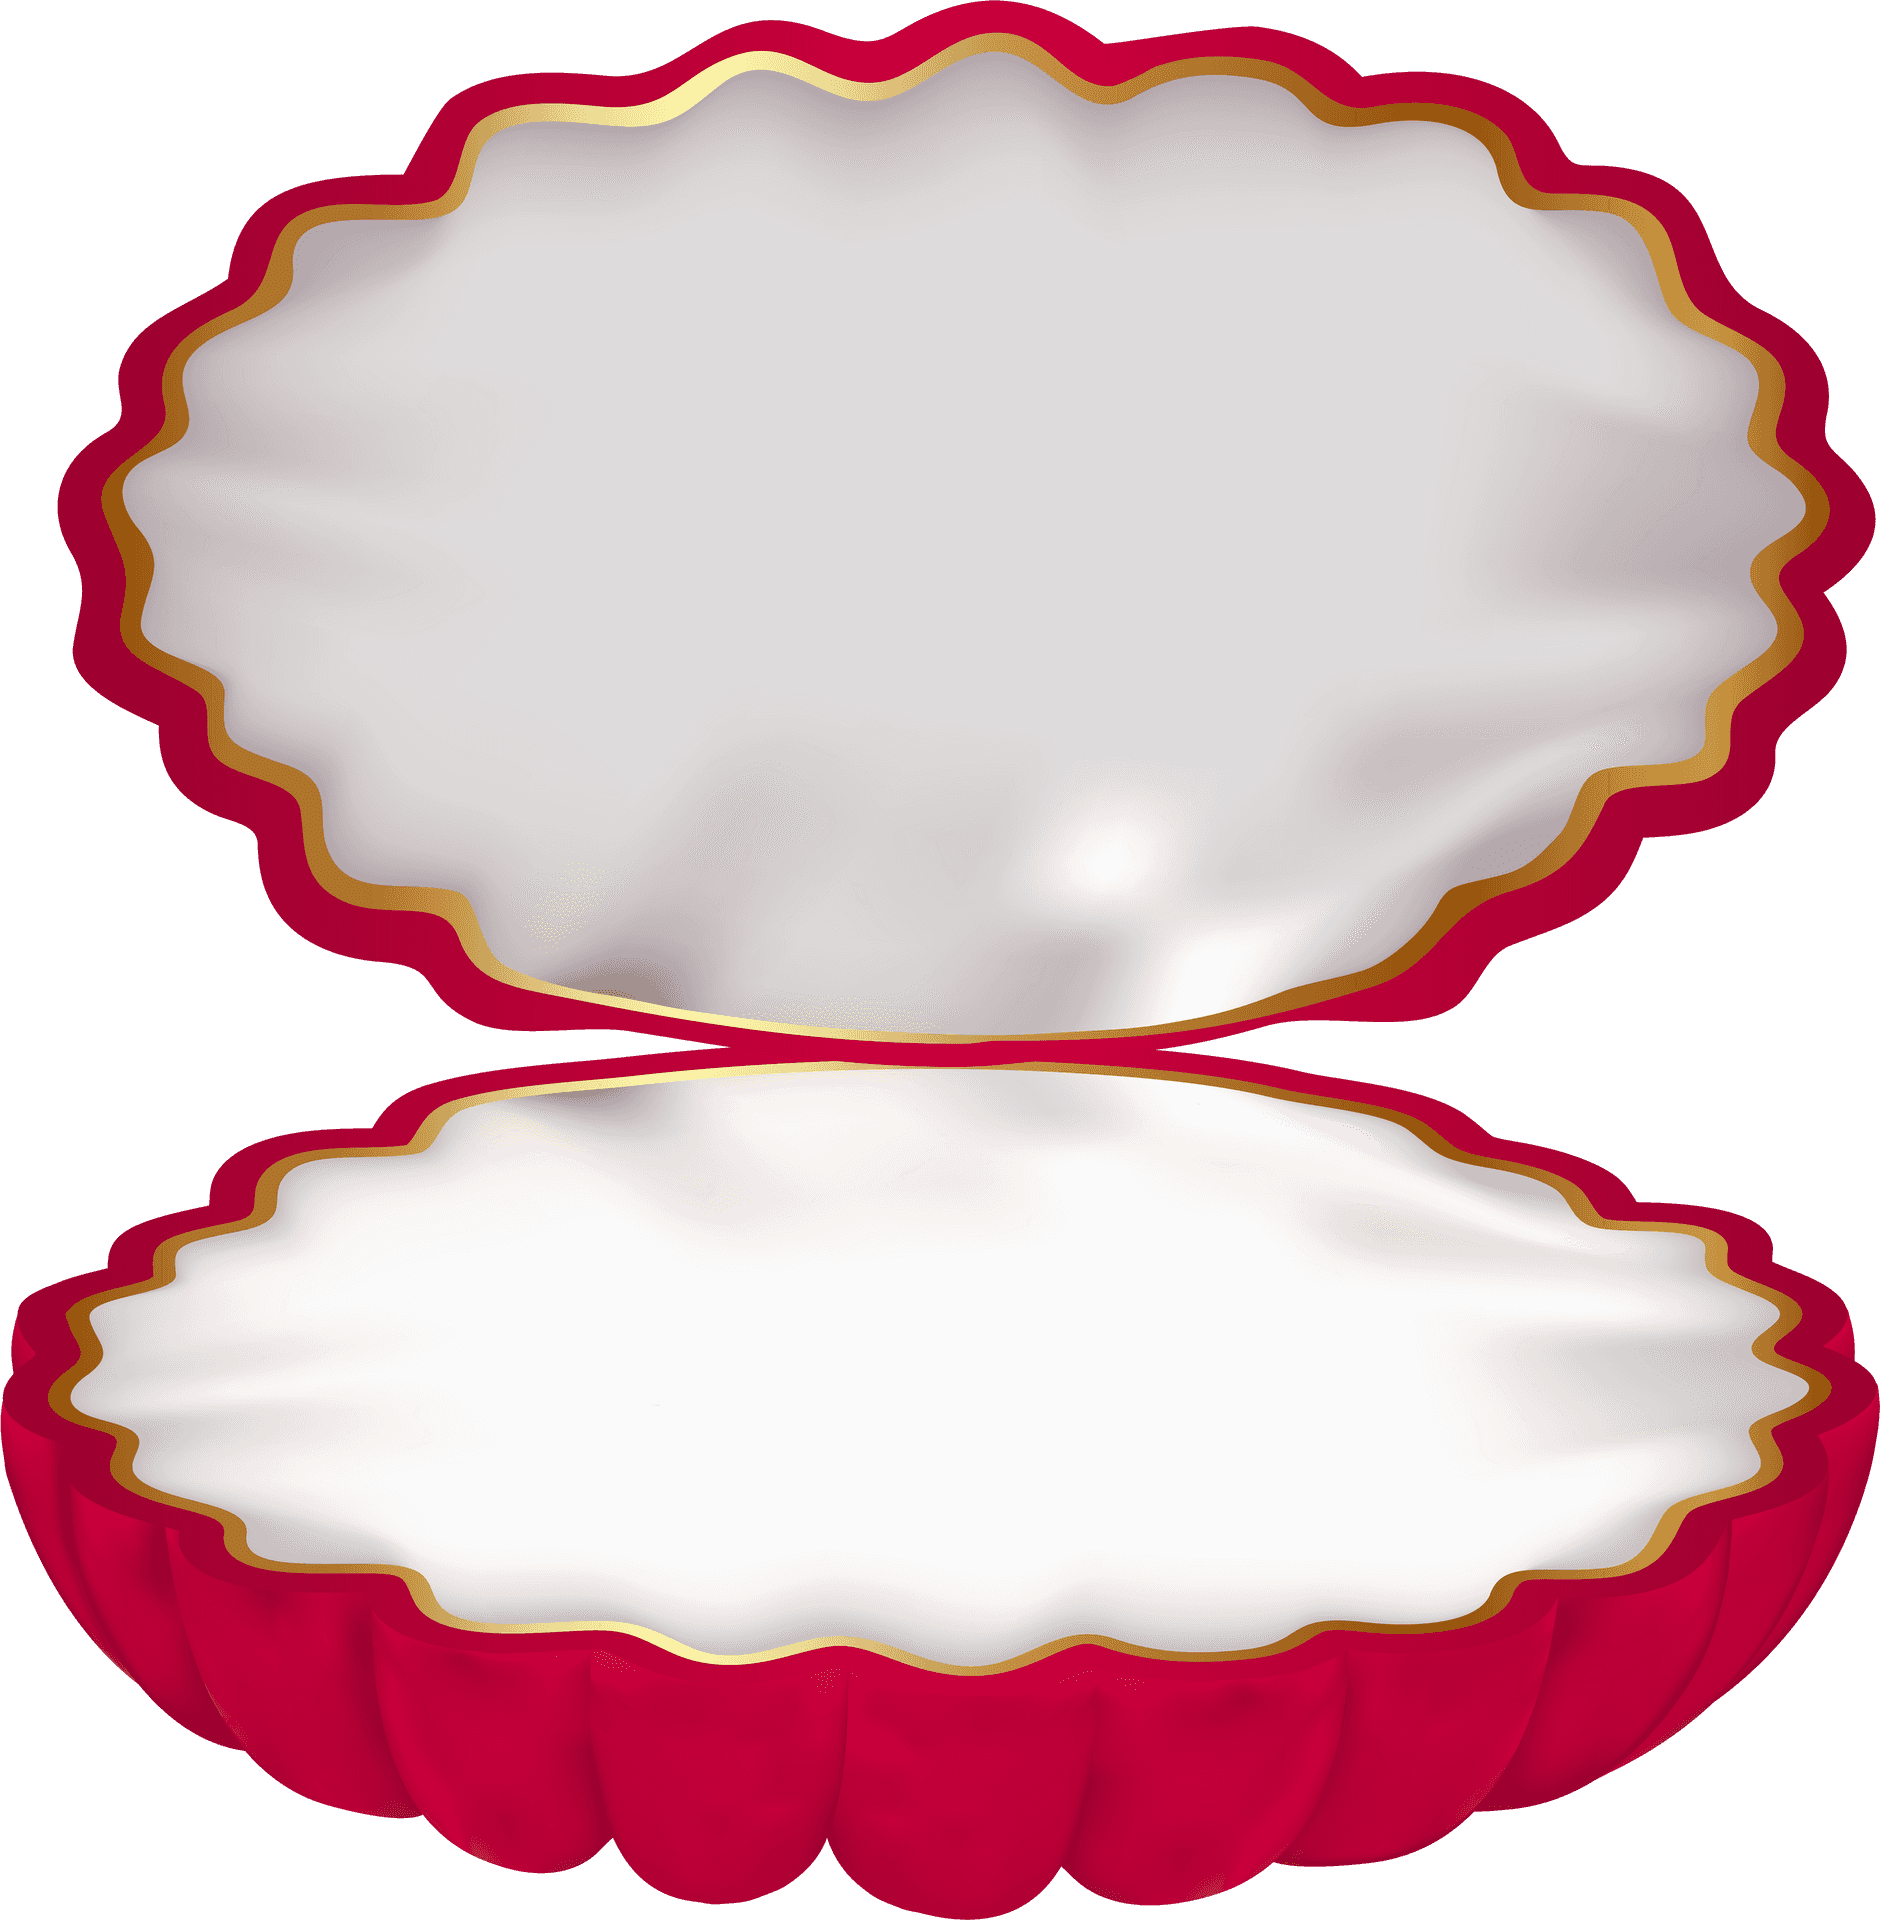 Open Clam Shell Illustration PNG image